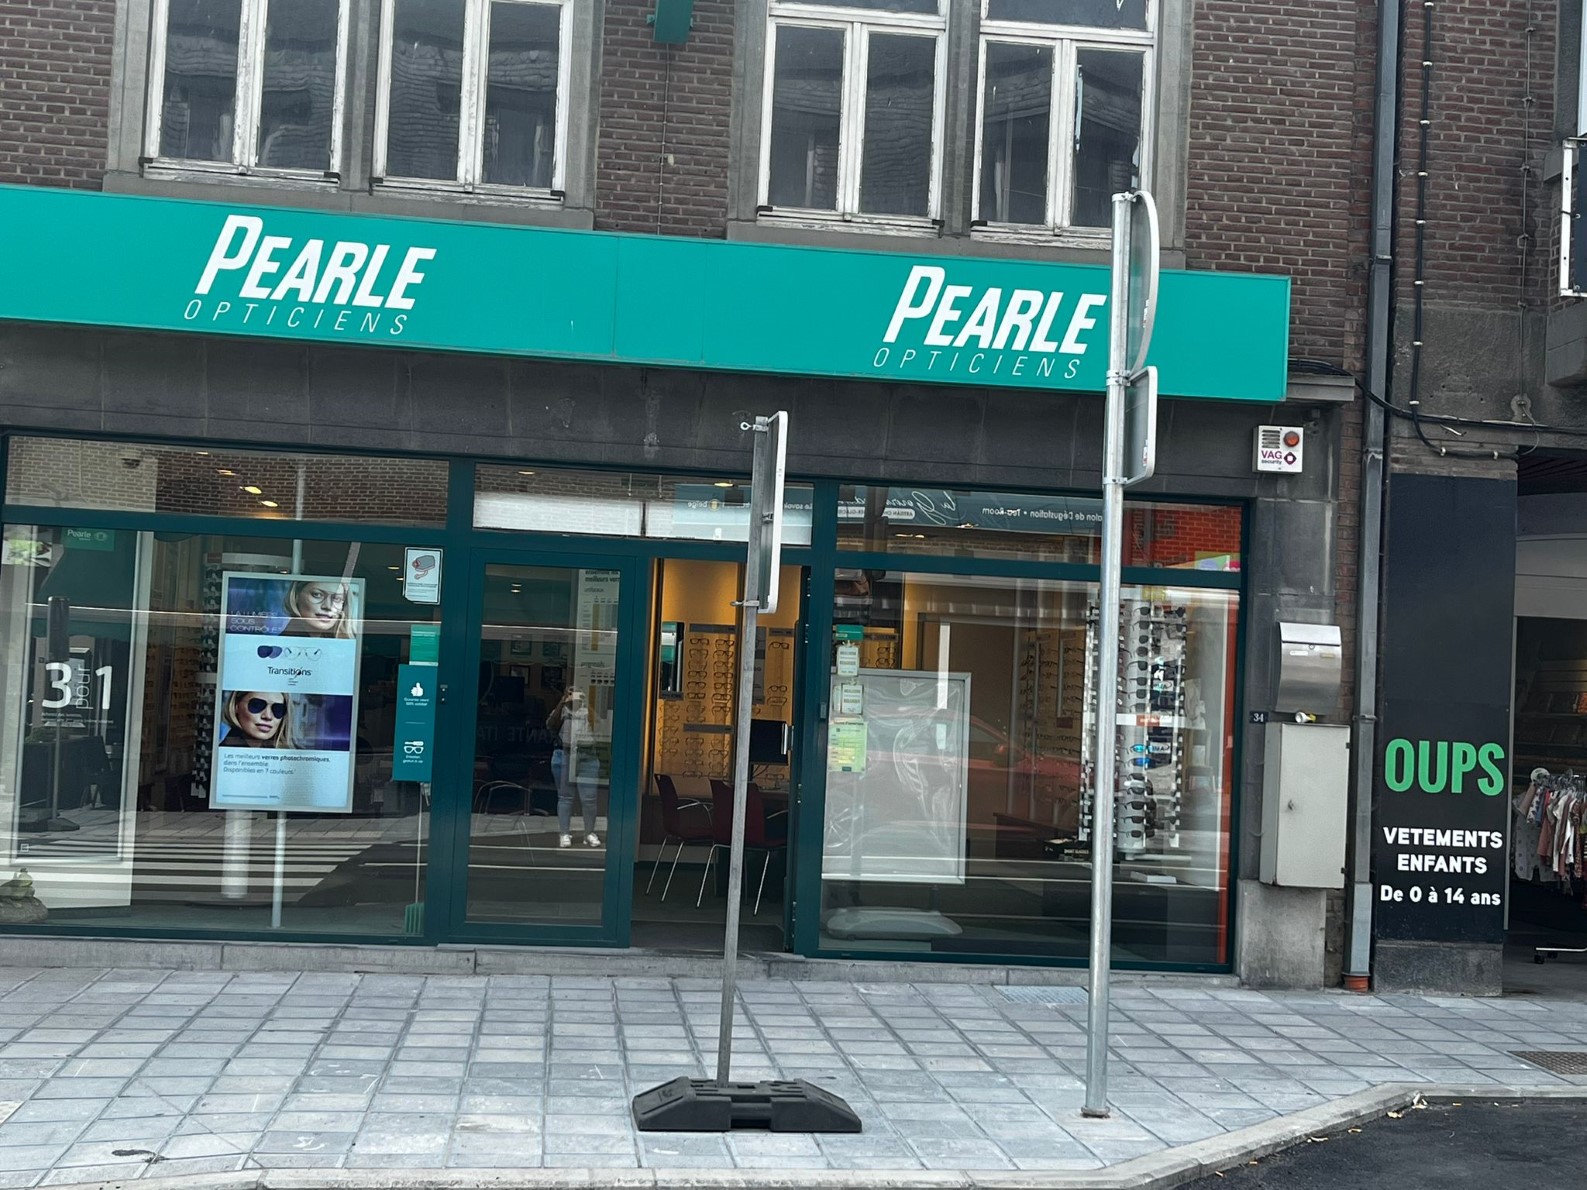 Pearle Opticiens Beauraing